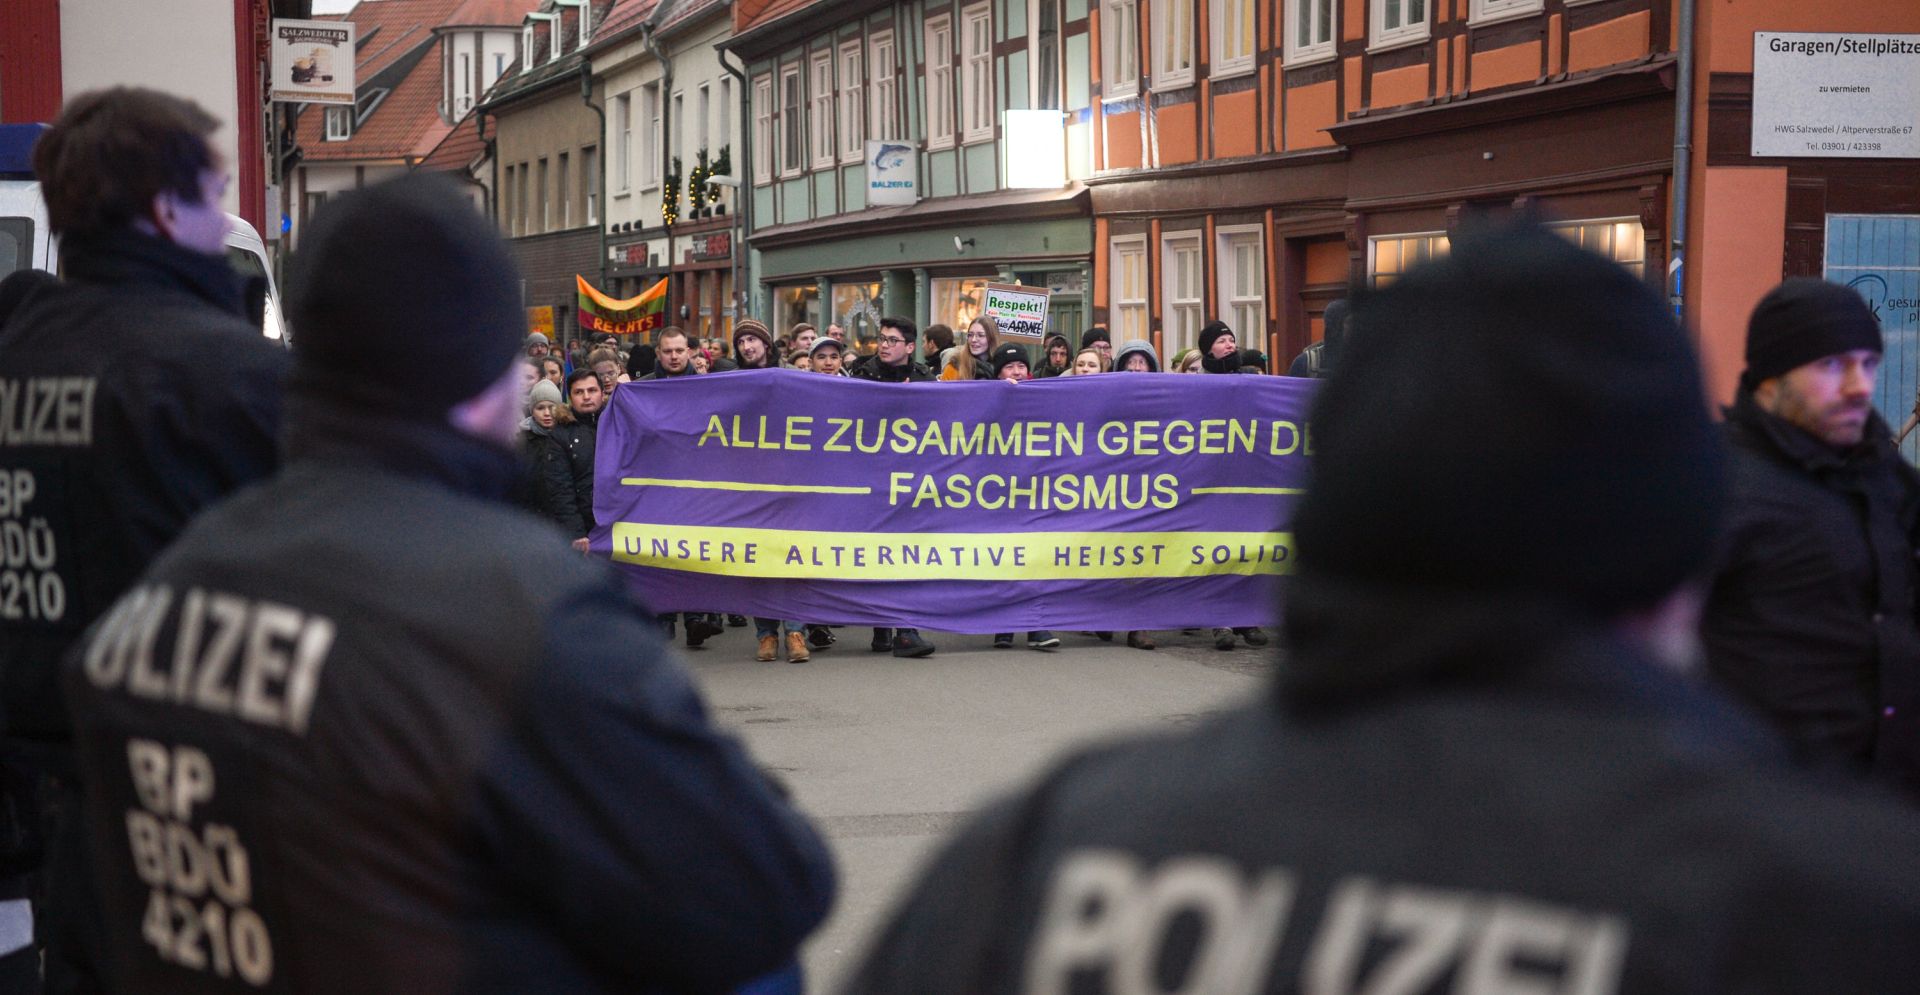 24 January 2020, Saxony-Anhalt, Salzwedel: People hold signs as they march during a demonstration against an event held by the Alternative for Germany (AfD) party at the municipal culture house of Salzwedel. Photo: Heiko Rebsch/dpa-Zentralbild/dpa